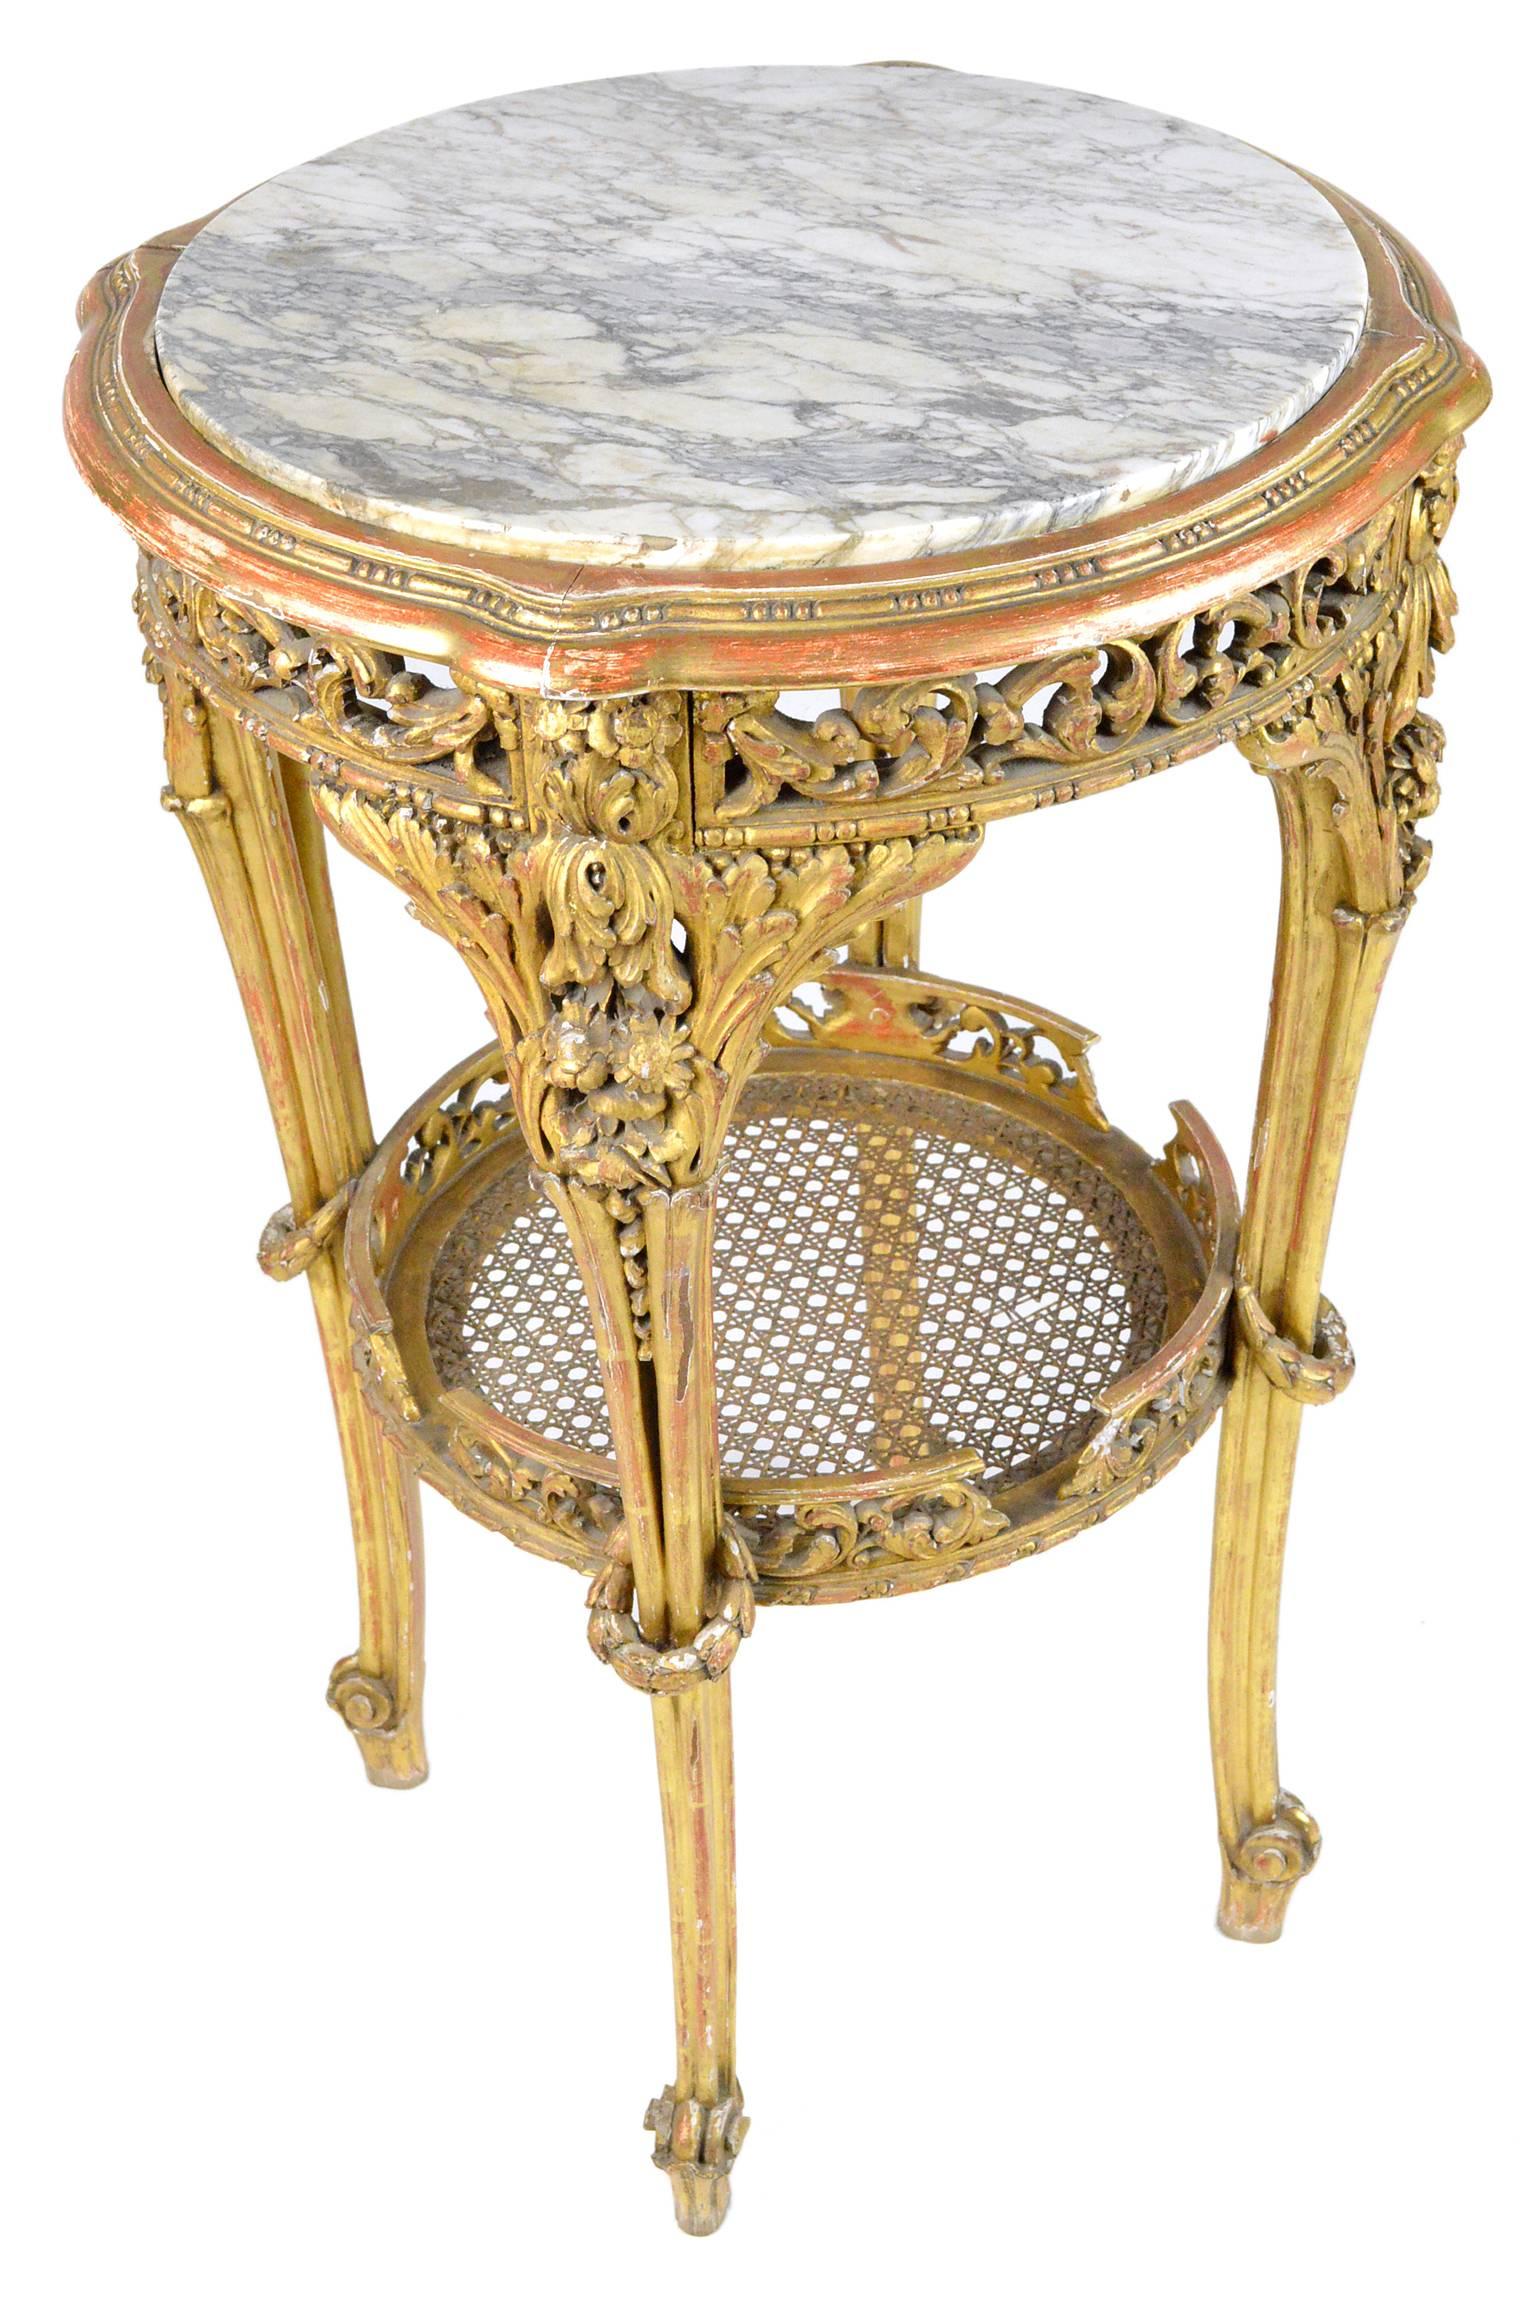 Late 19th, early 20th century French Baroque style giltwood marble-top table.